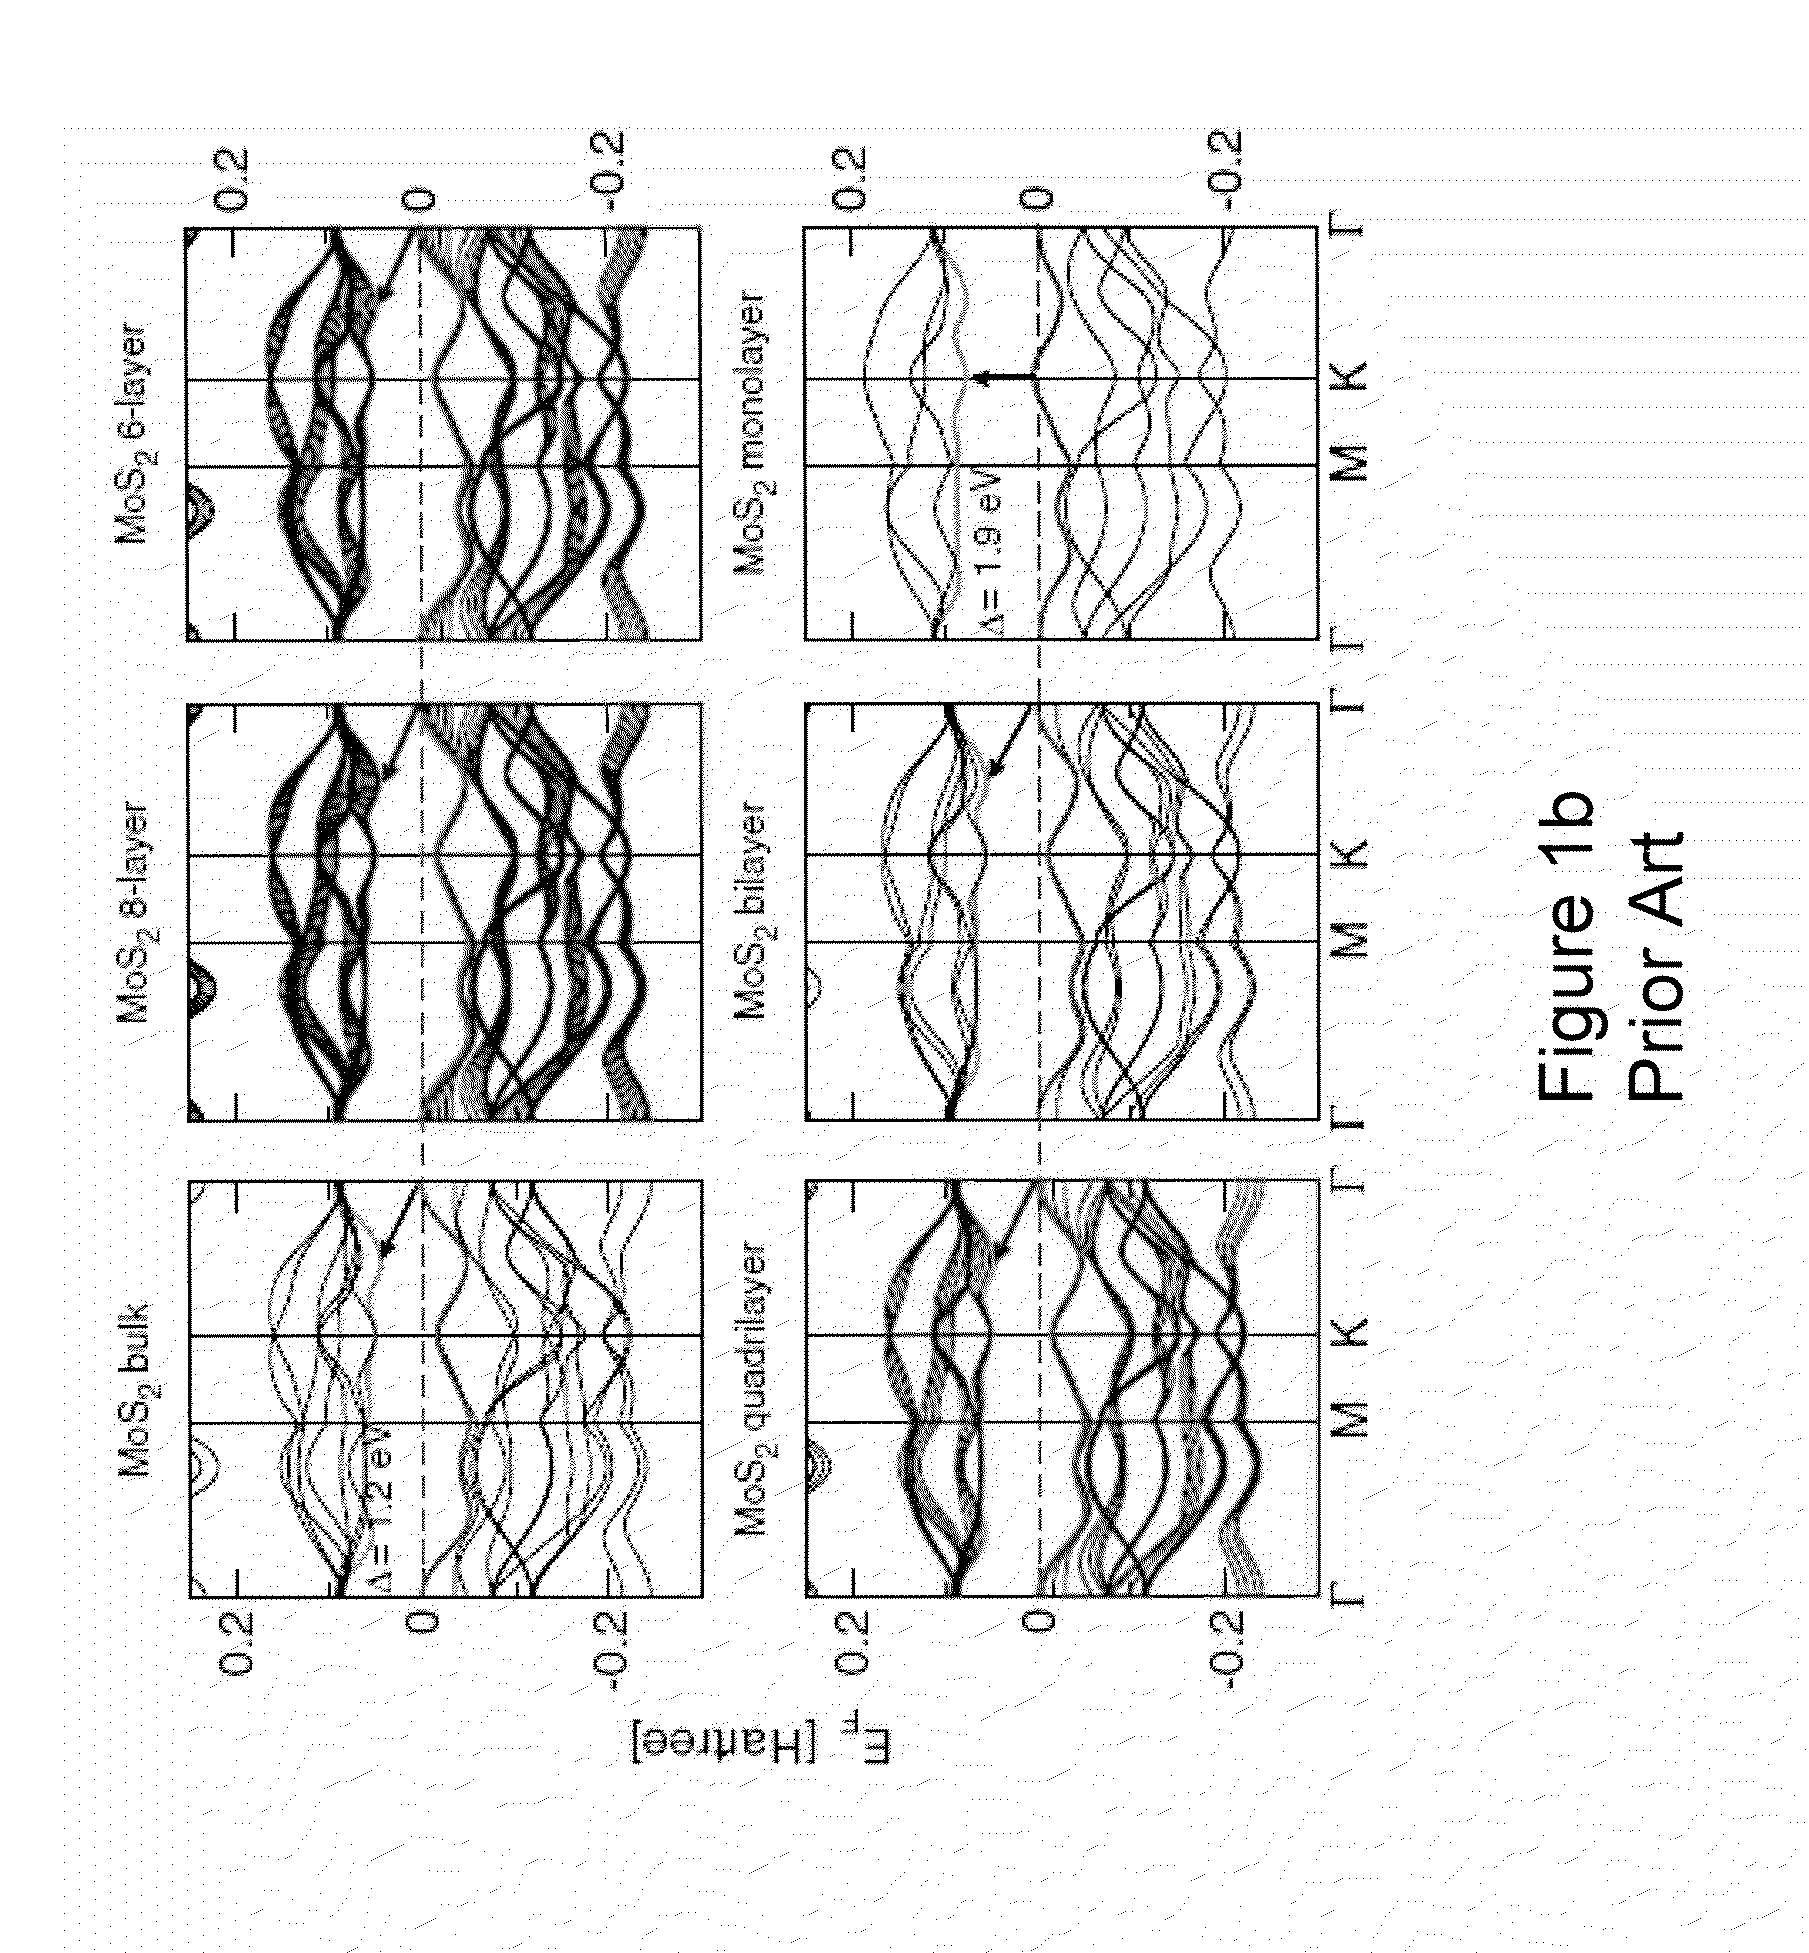 Method and System for Generating a Photo-Response from MoS2 Schottky Junctions